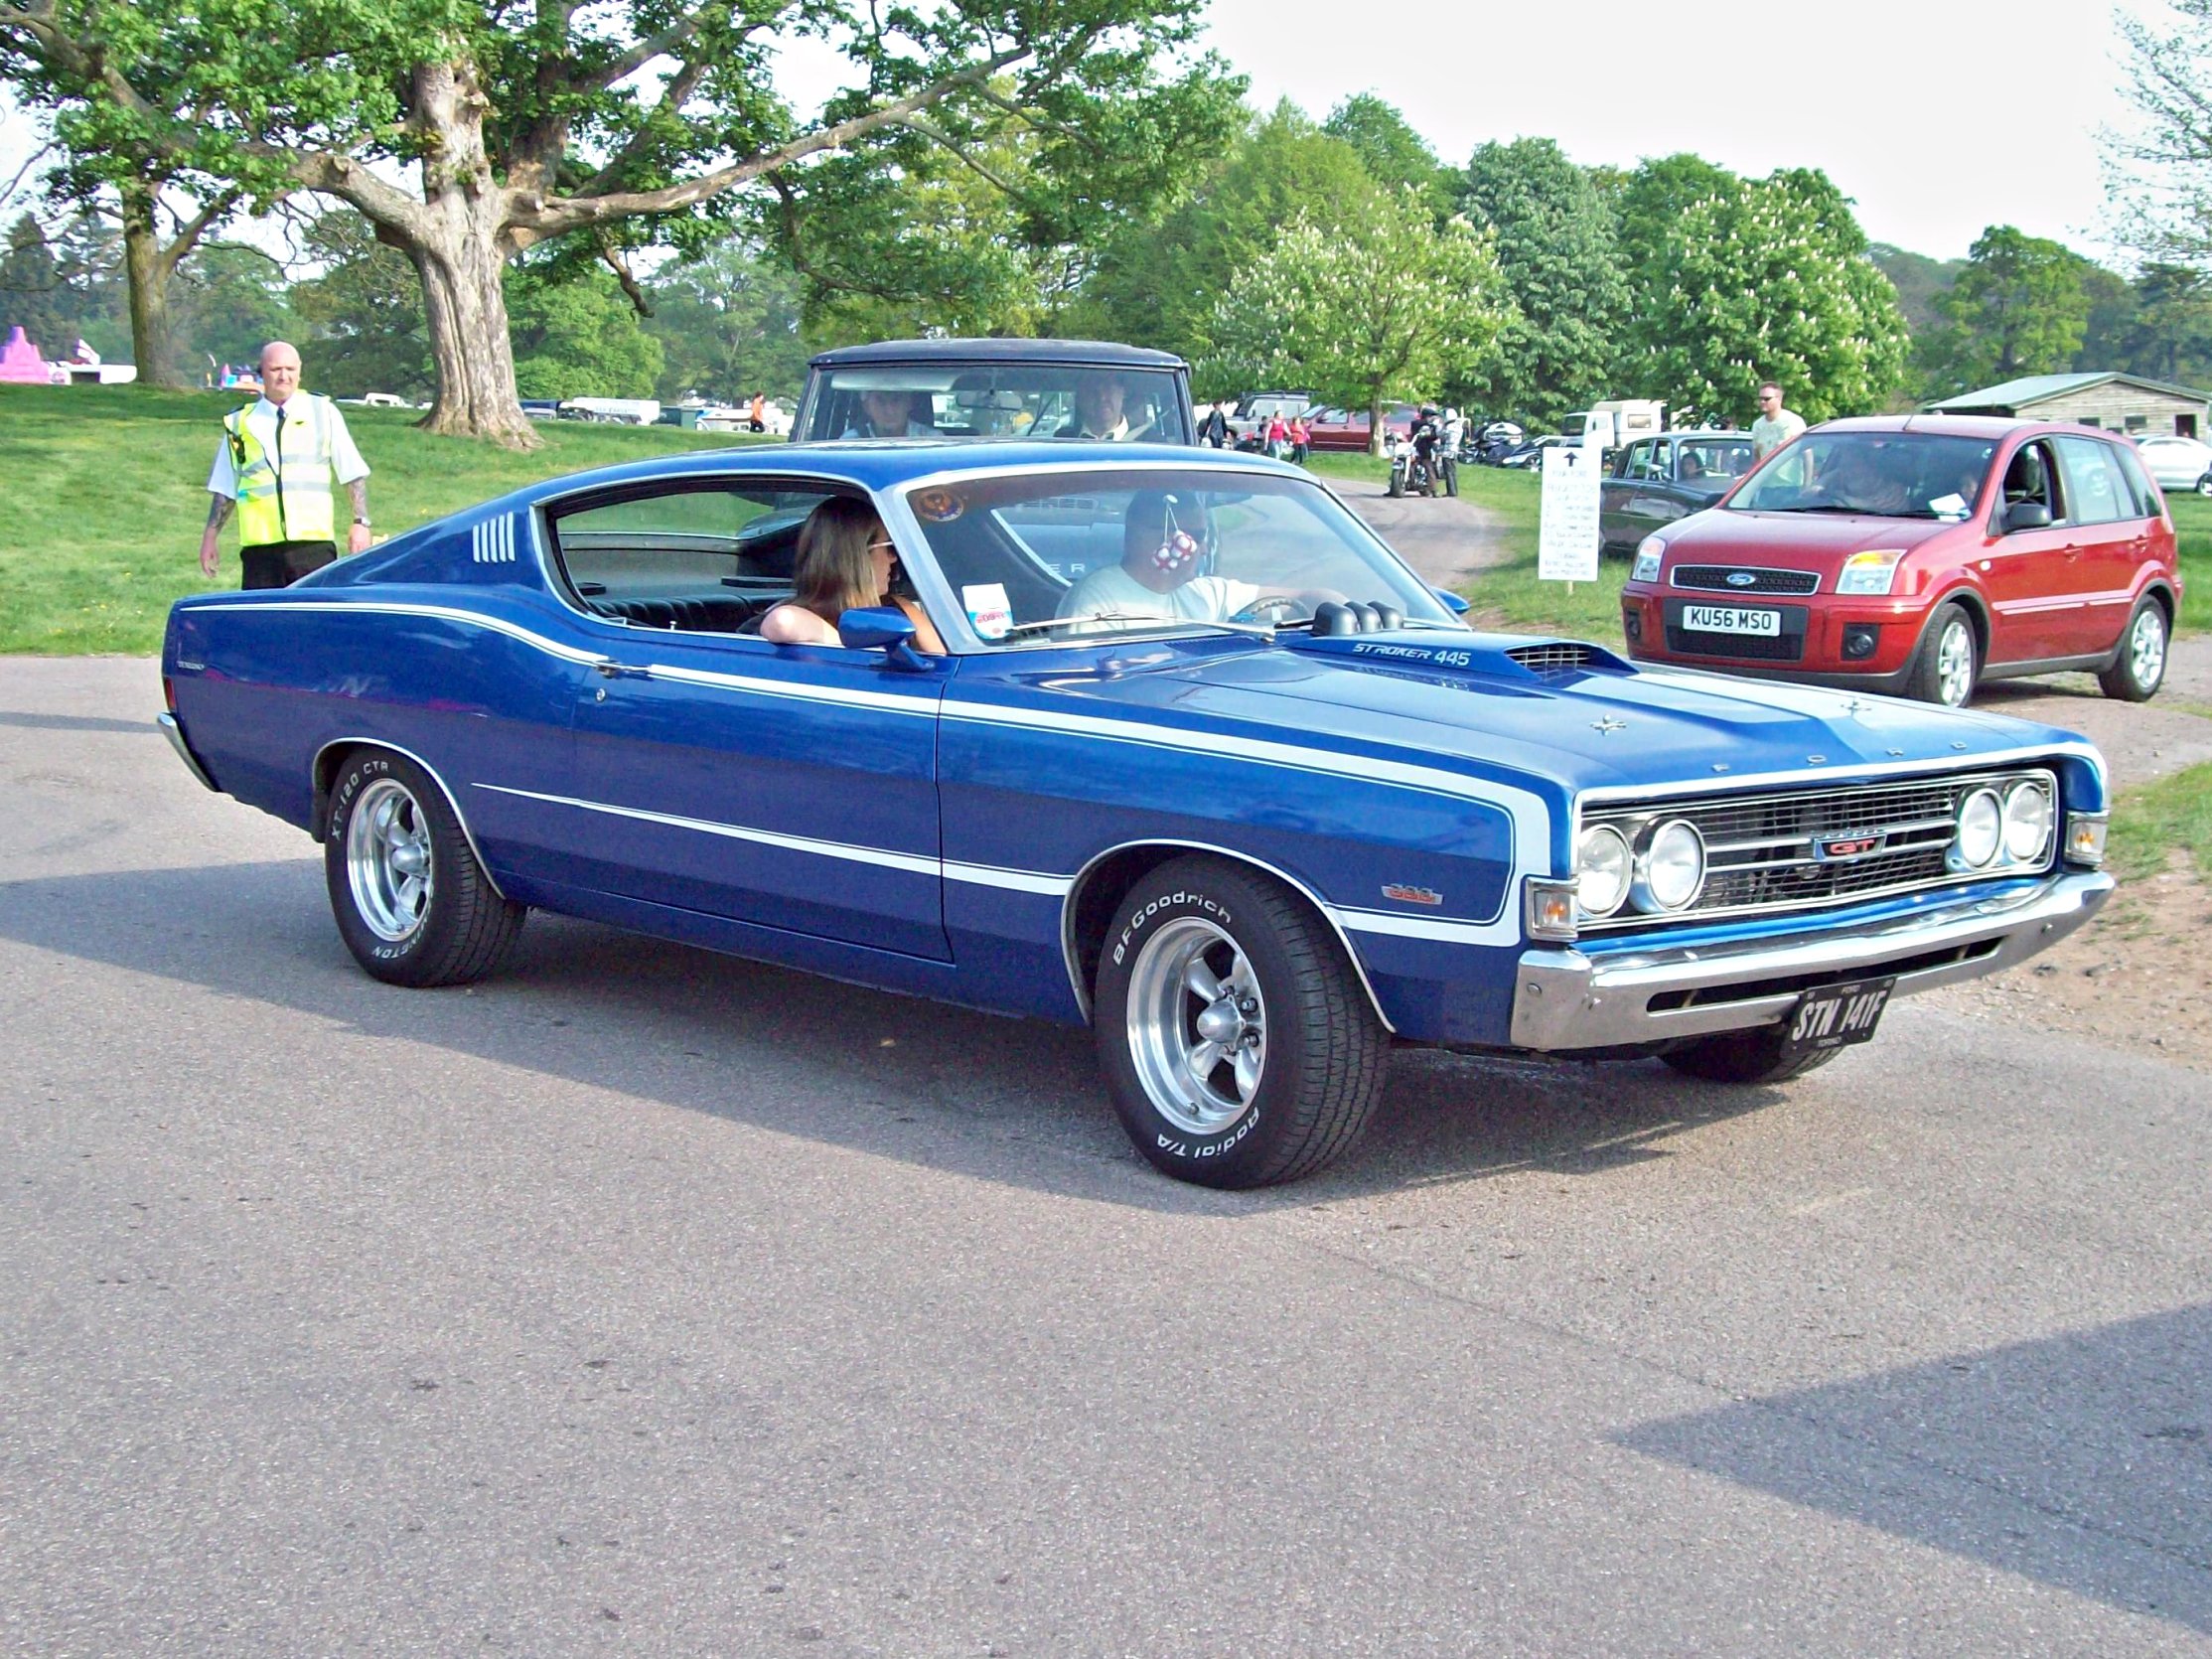 Ford Torino GT Backgrounds, Compatible - PC, Mobile, Gadgets| 2227x1670 px